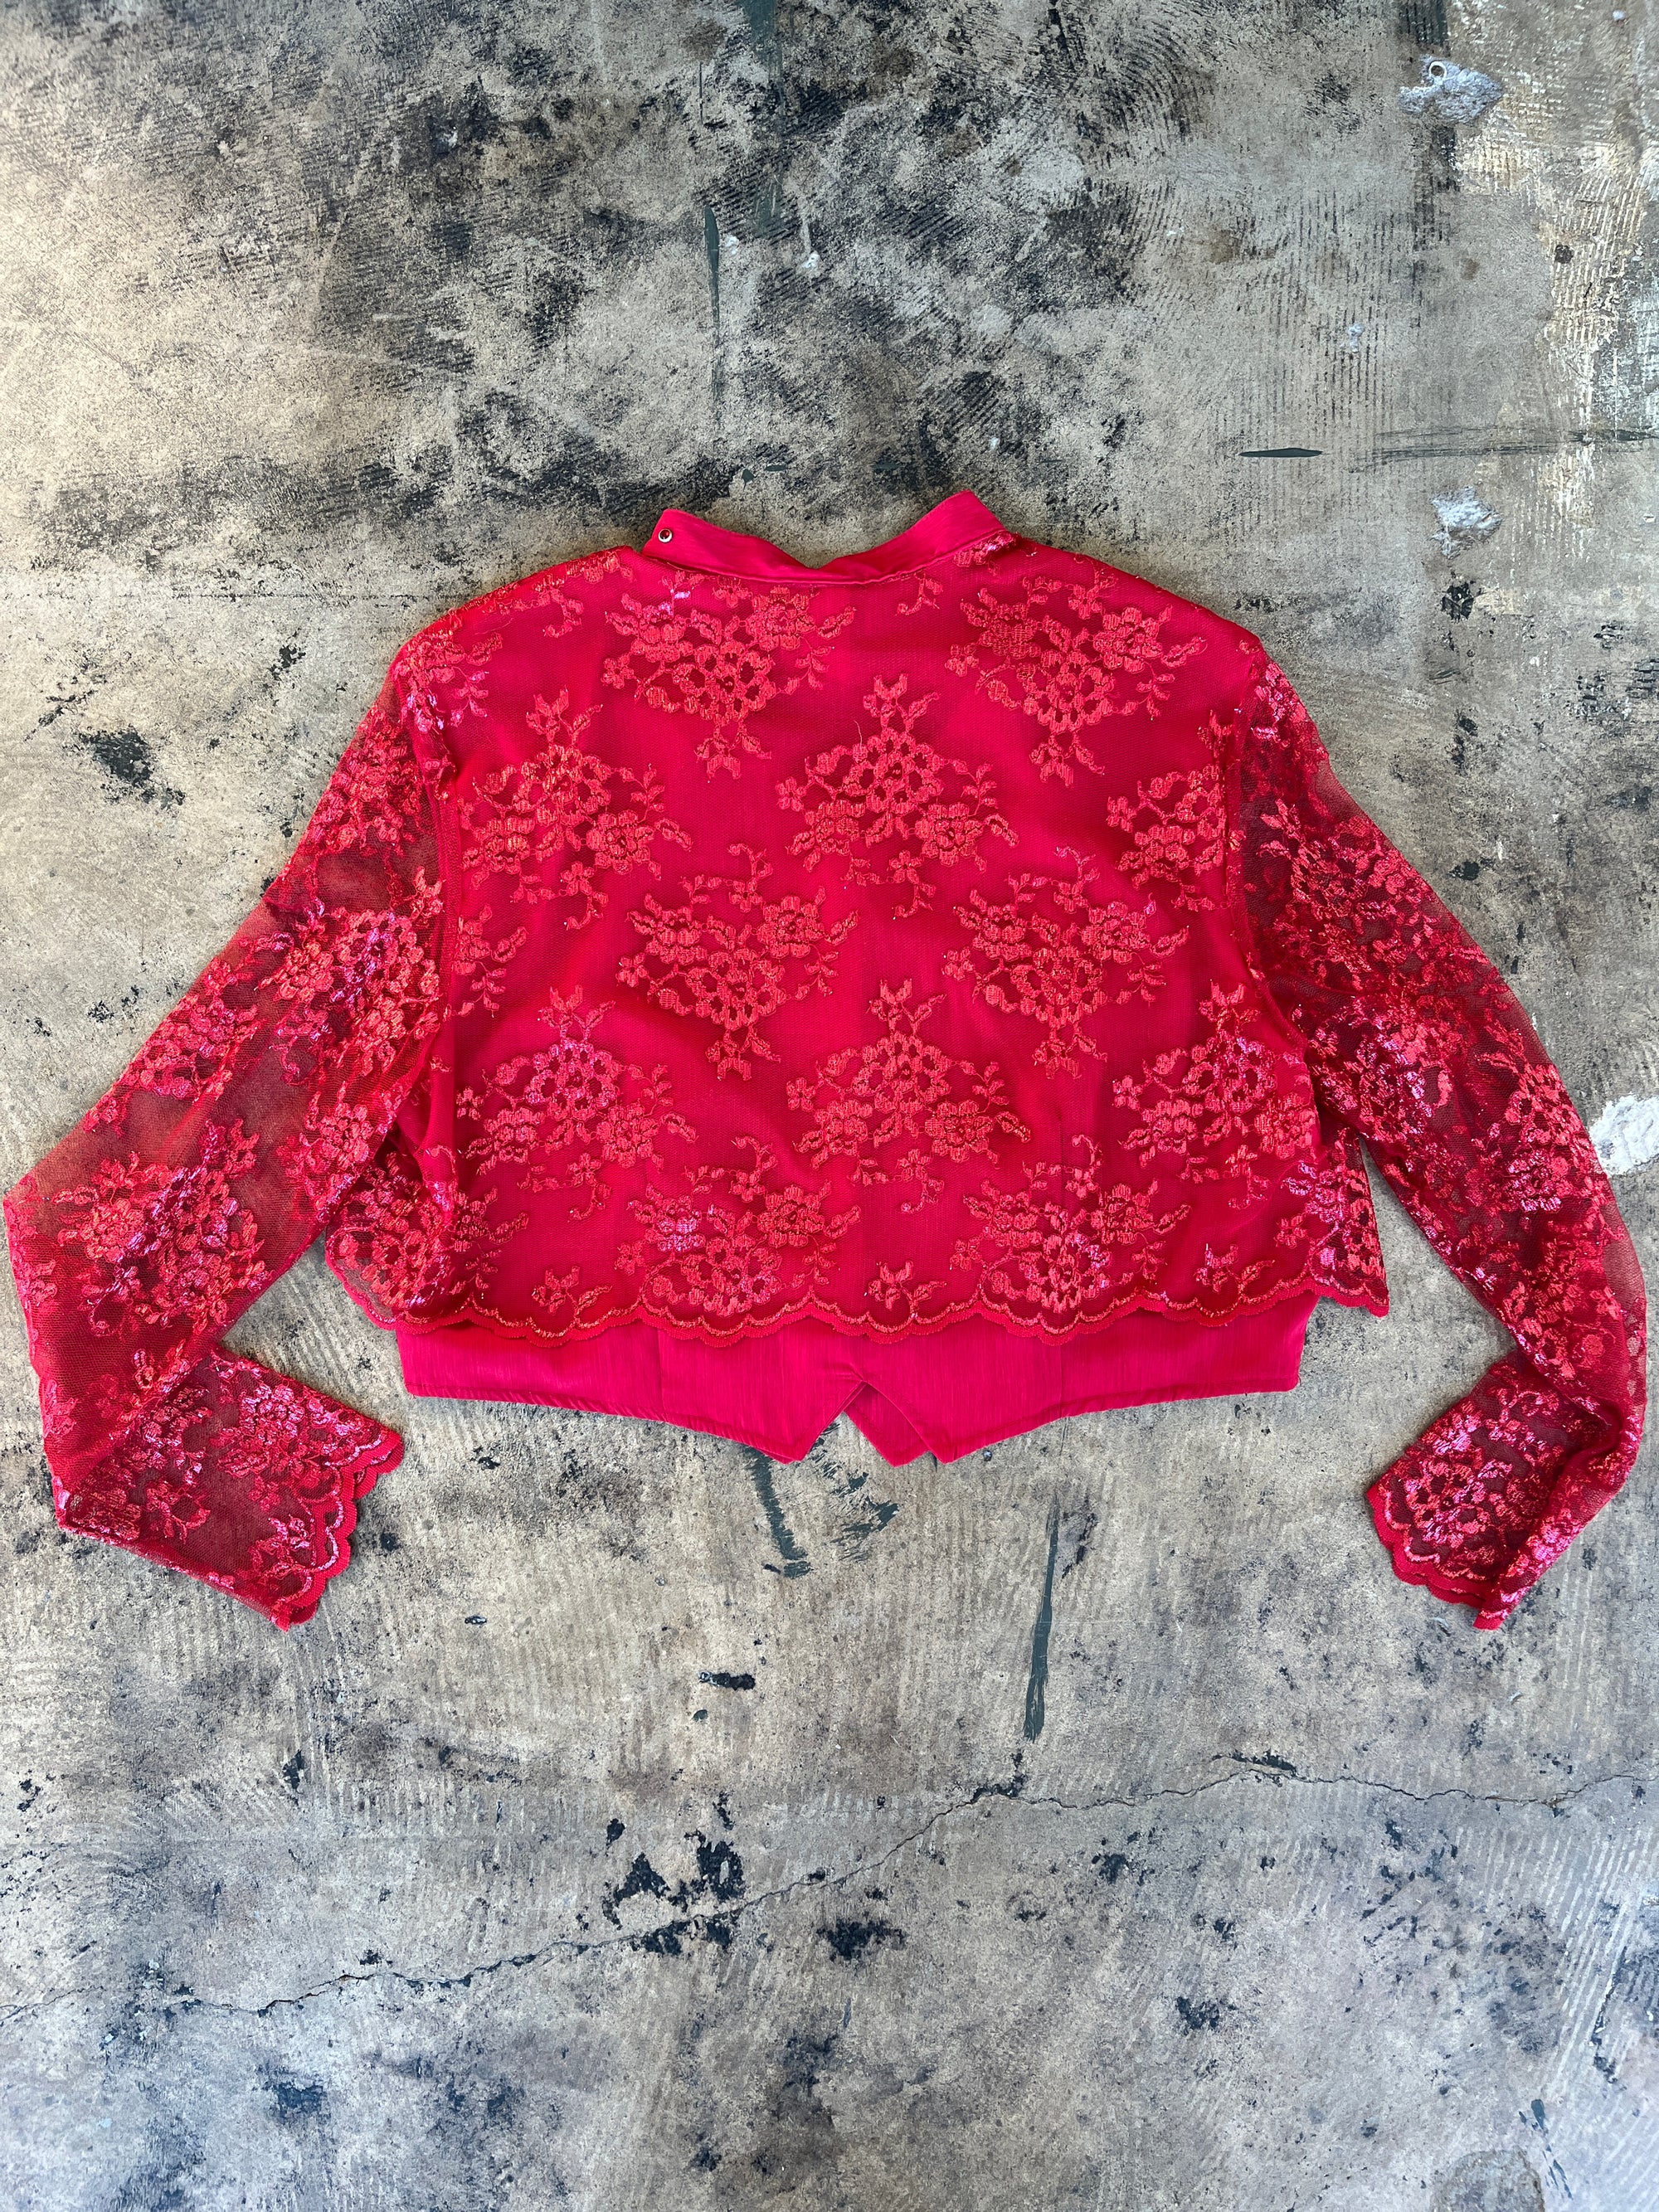 Ranch Wear Shiny Red Lace Cropped Blouse